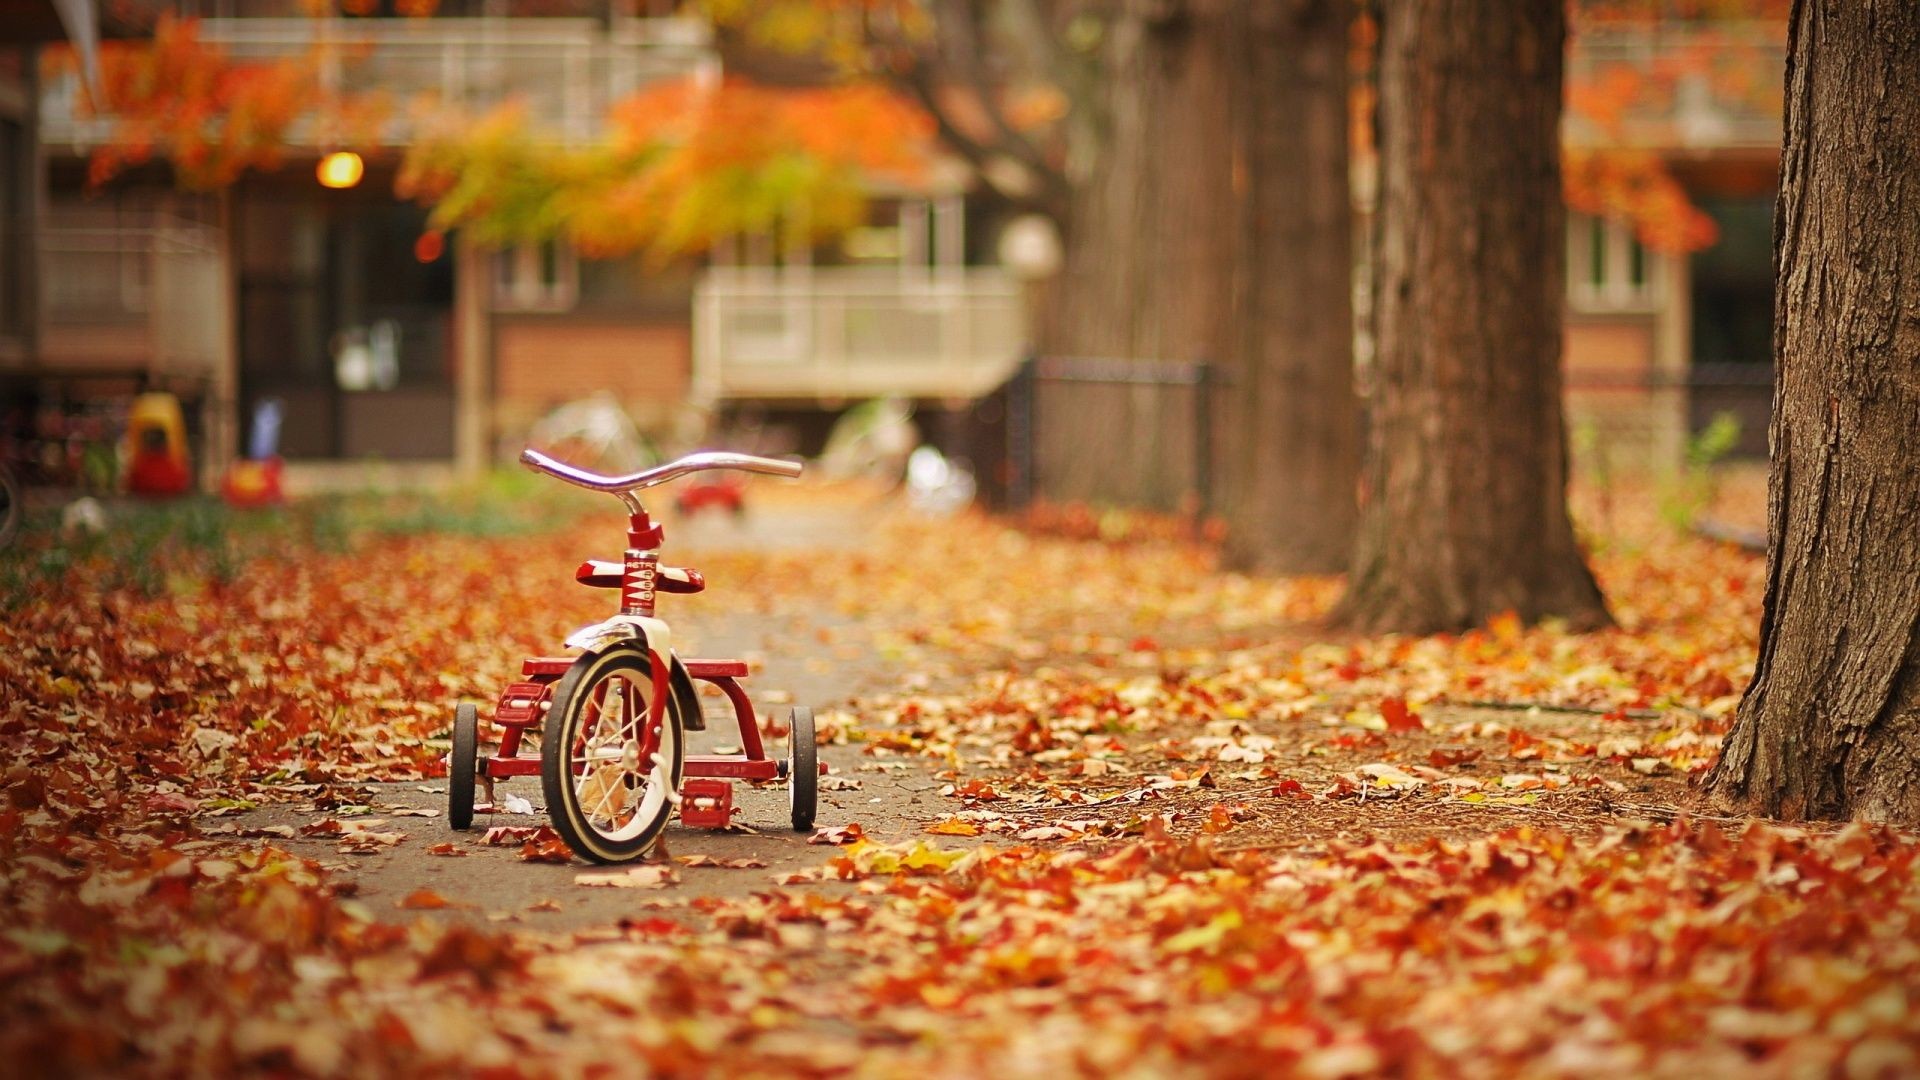 1920x1080 fall images | Description: The Wallpaper above is Tricycle in Autumn  Wallpaper in .